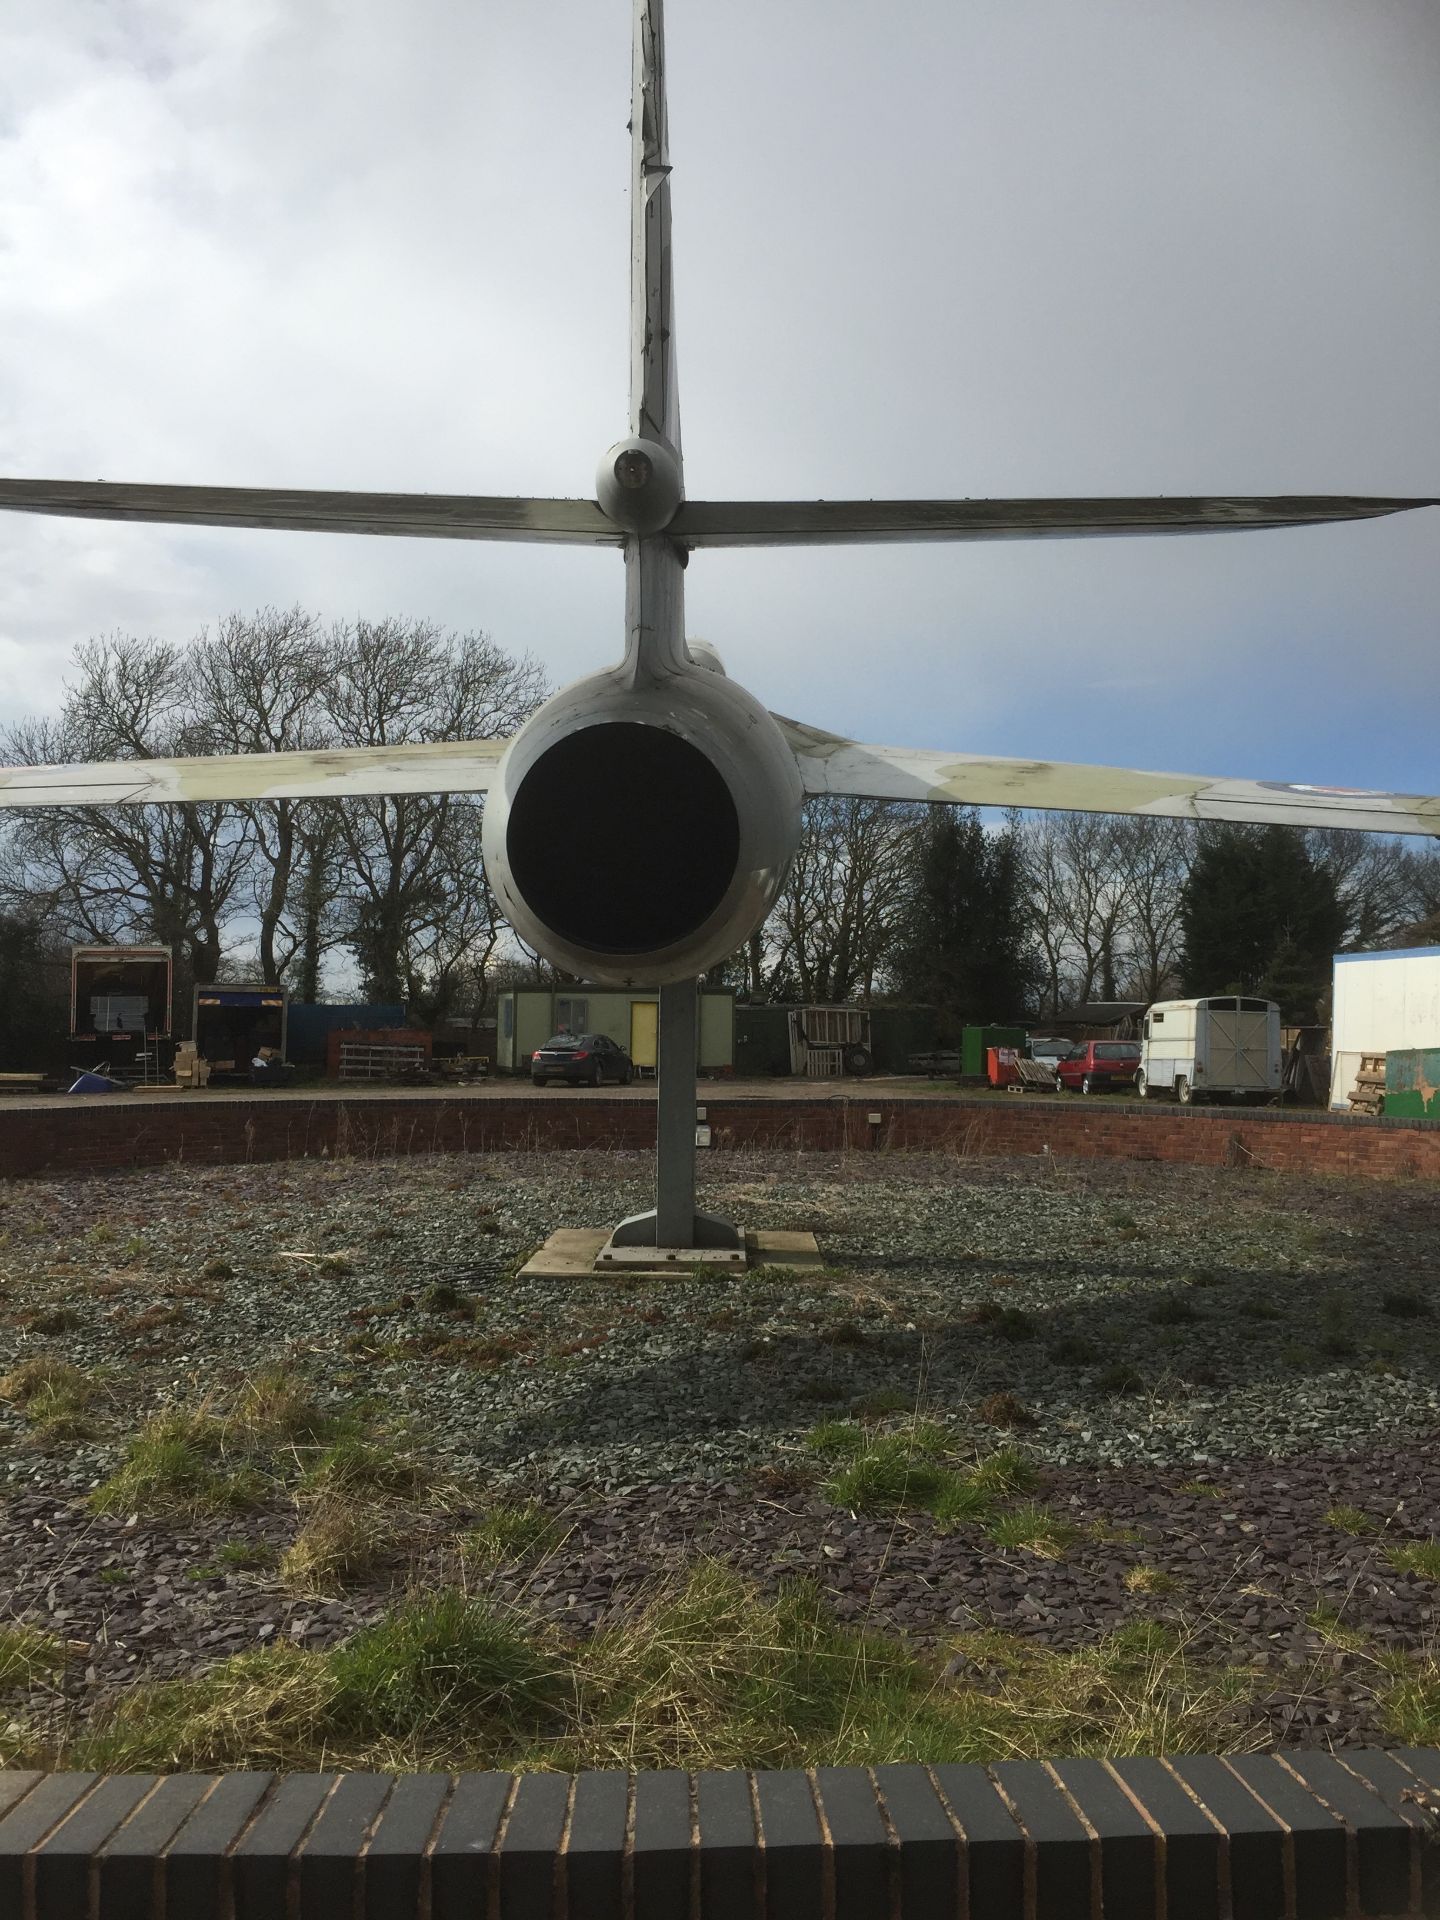 Hawker Hunter Jet - Comes With Stand. Wings are detachable for transport - Image 17 of 26